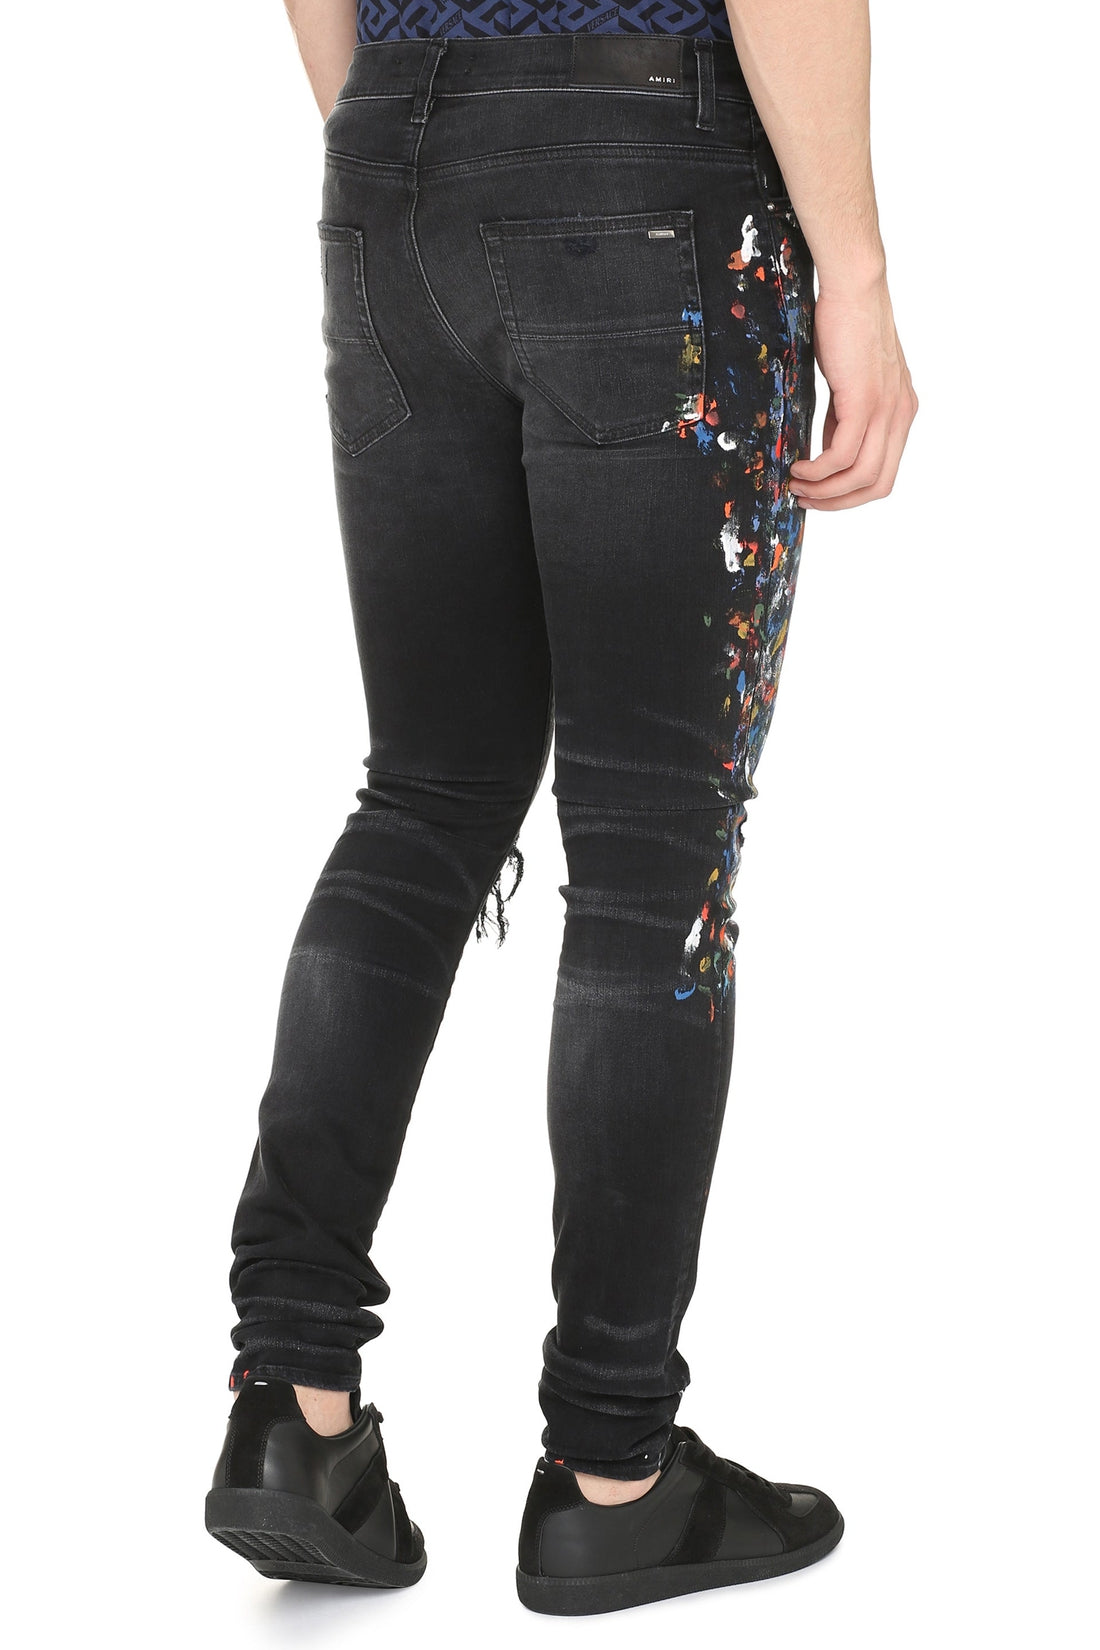 AMIRI-OUTLET-SALE-Stretch skinny jeans-ARCHIVIST